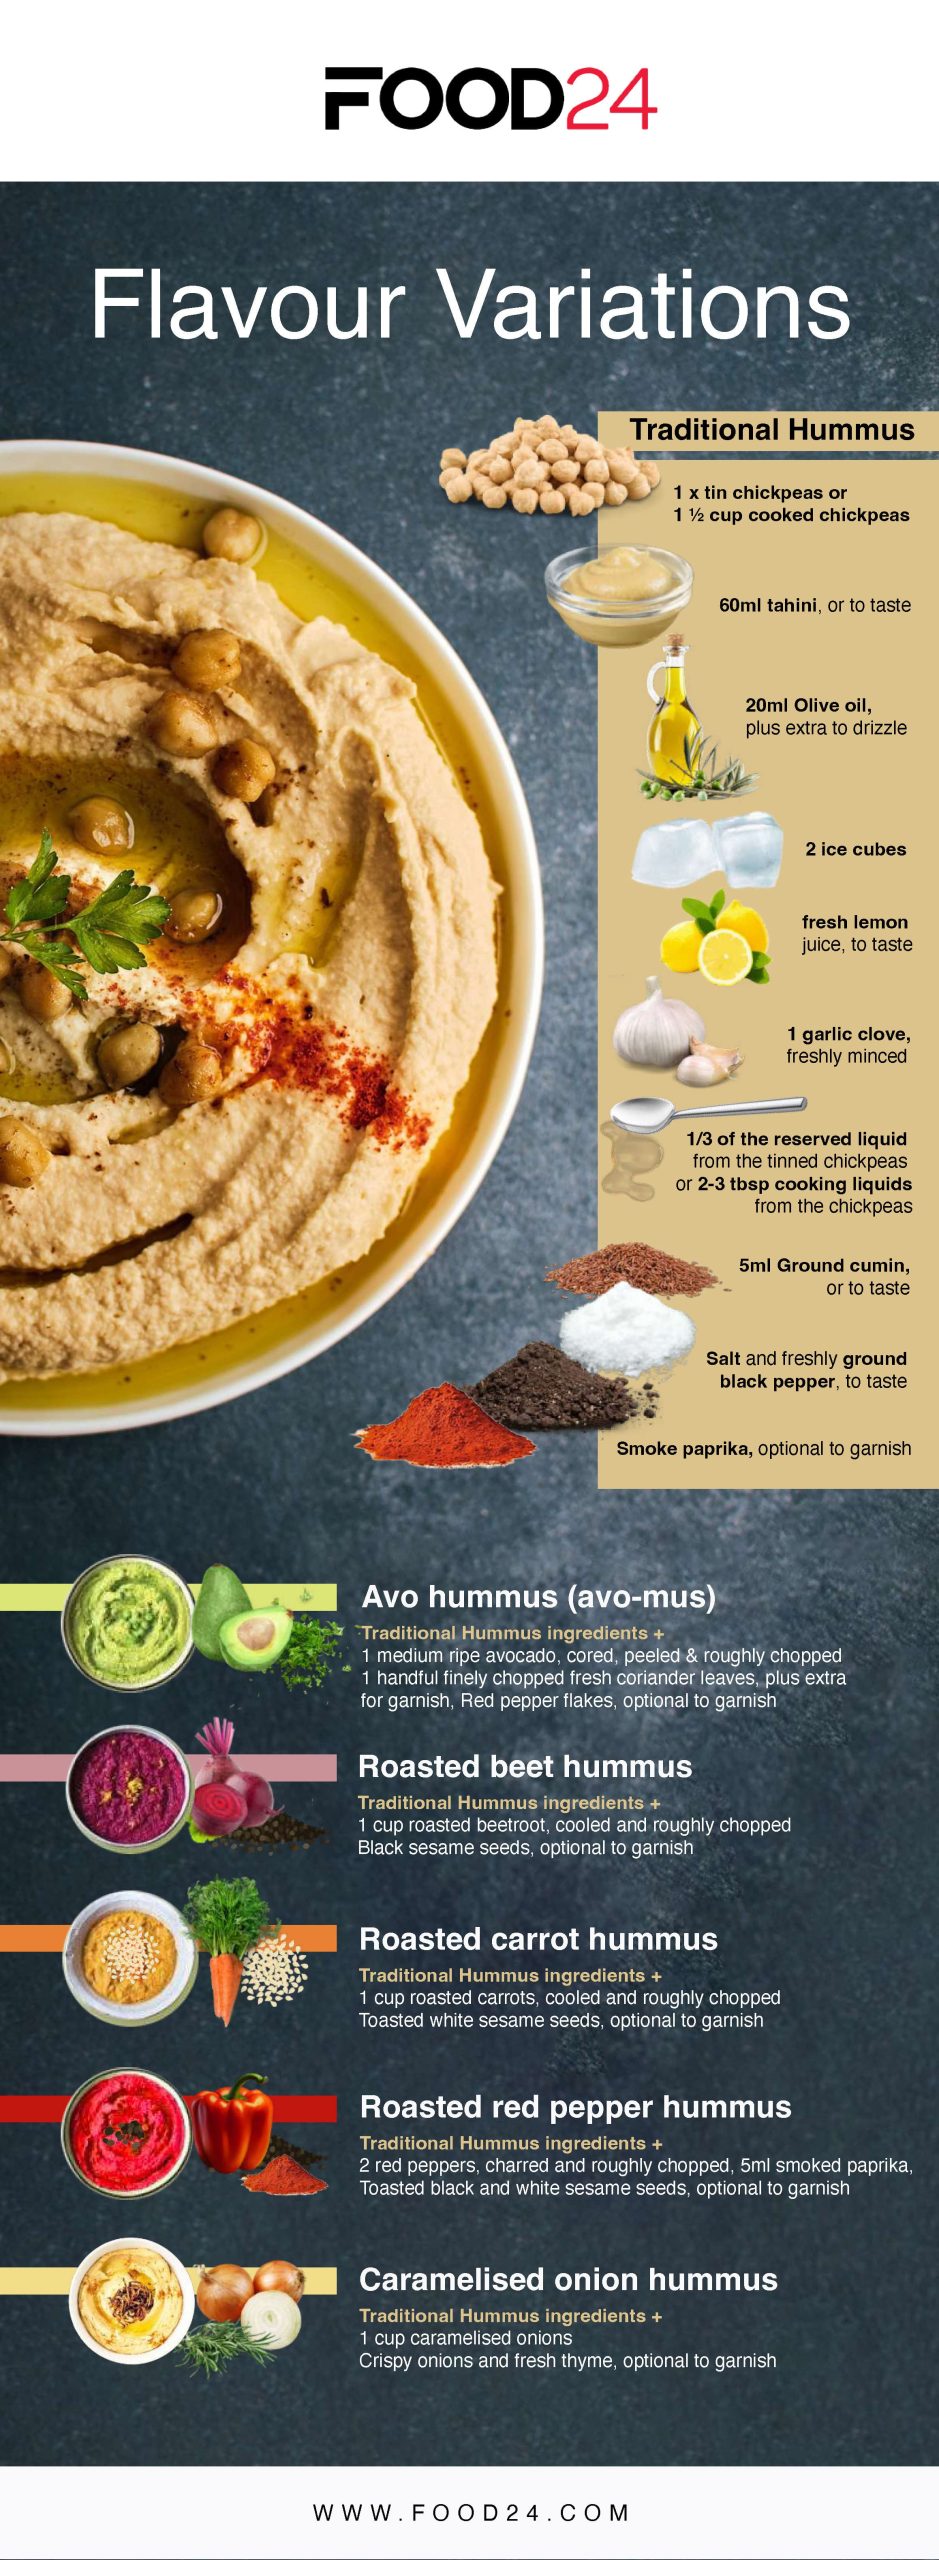 Expert tips for making creamy hummus plus flavour variations to try